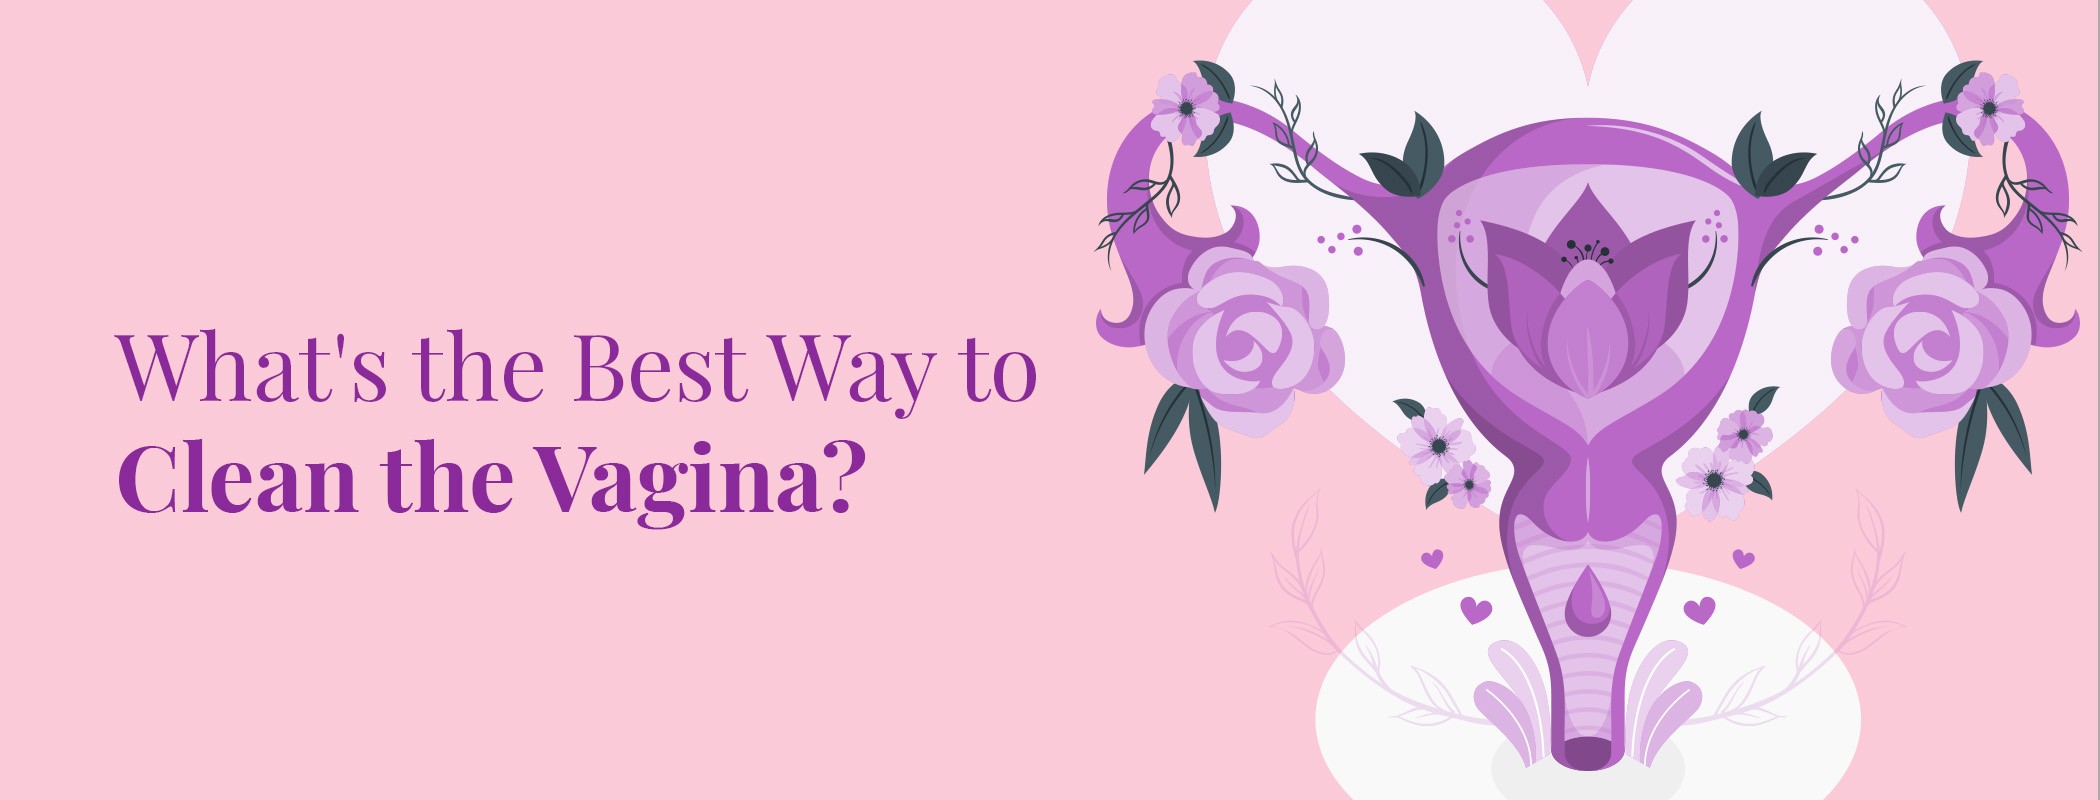 How to clean the vagina?